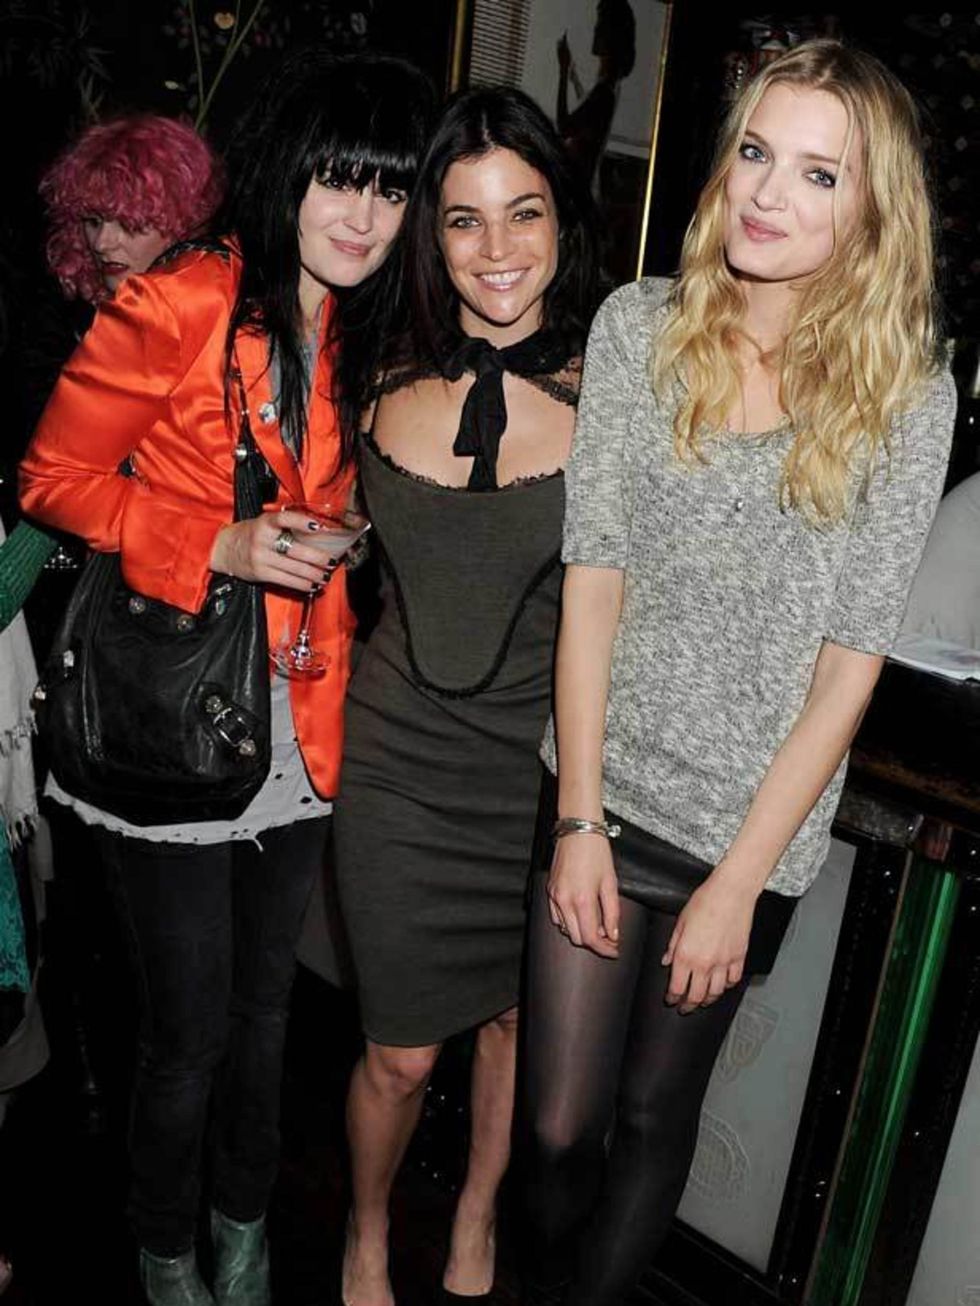 <p><a href="http://www.elleuk.com/content/search?SearchText=Alison+Mosshart&amp;SearchButton=Search">Alison Mosshart</a>, <a href="http://www.elleuk.com/starstyle/style-files/(section)/julia-restoin-roitfeld">Julia Restoin-Roitfeld</a> &amp; <a href="http